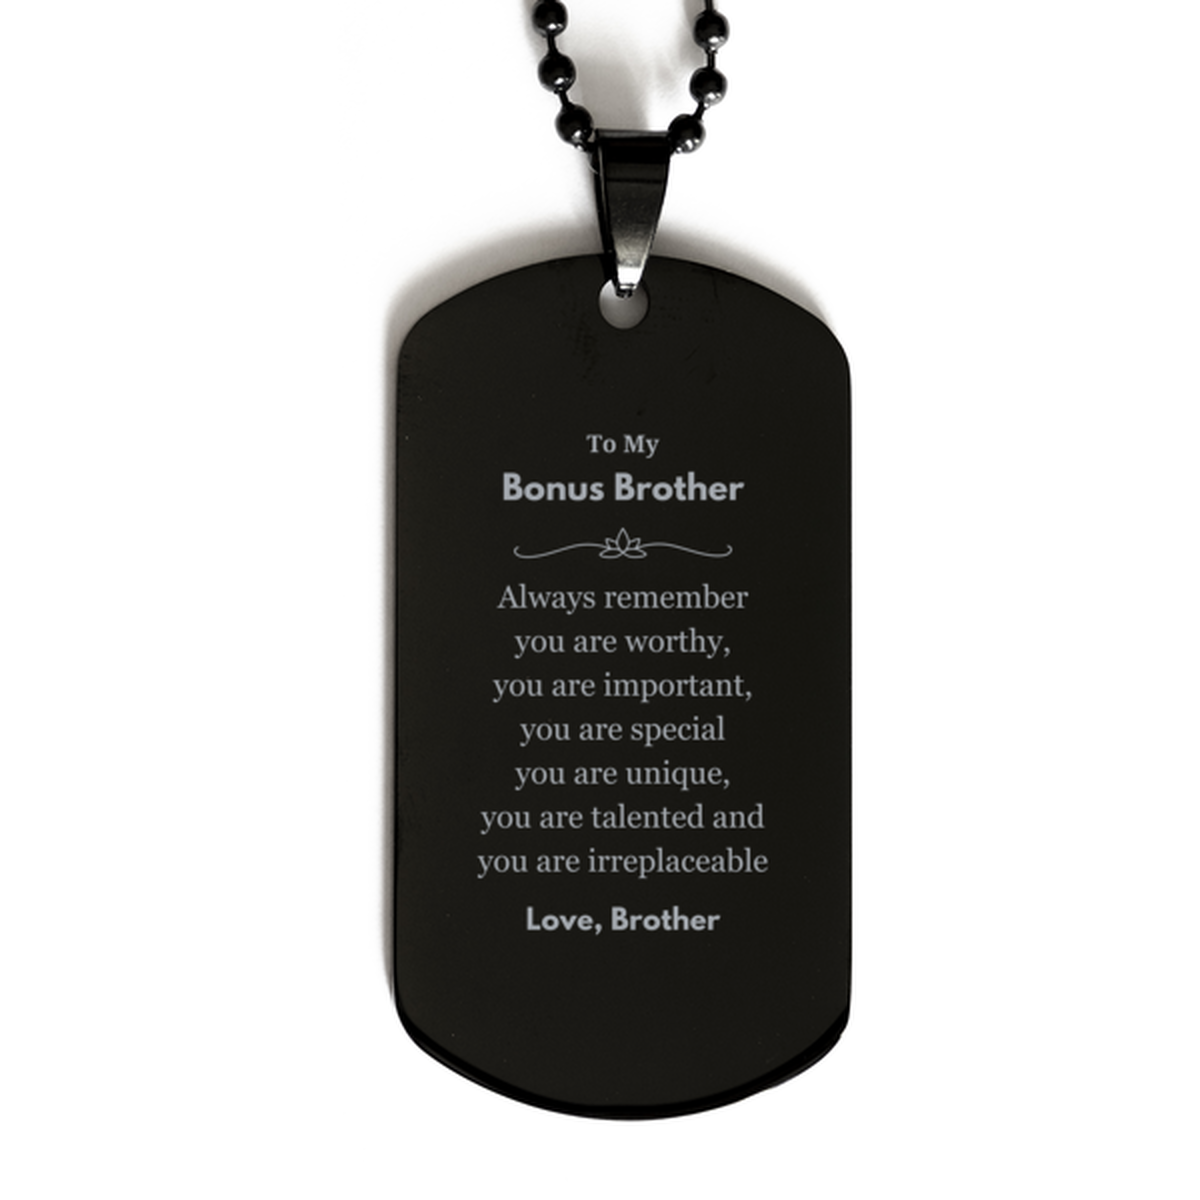 Bonus Brother Birthday Gifts from Brother, Inspirational Black Dog Tag for Bonus Brother Christmas Graduation Gifts for Bonus Brother Always remember you are worthy, you are important. Love, Brother